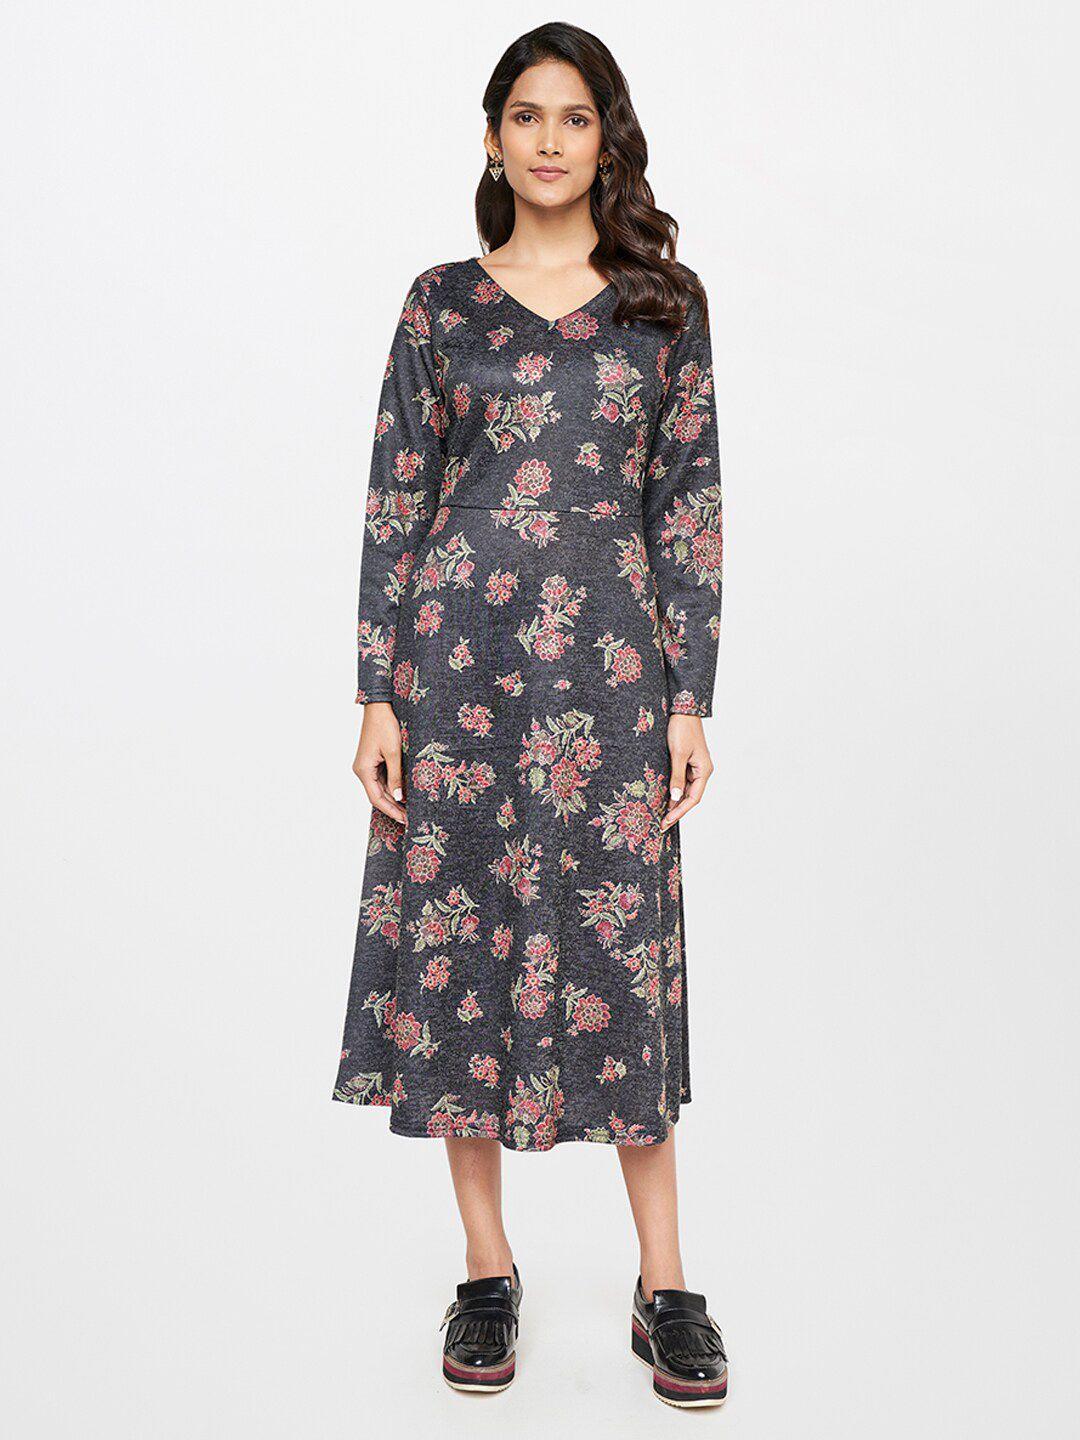 itse-grey-&-red-floral-a-line-midi-dress